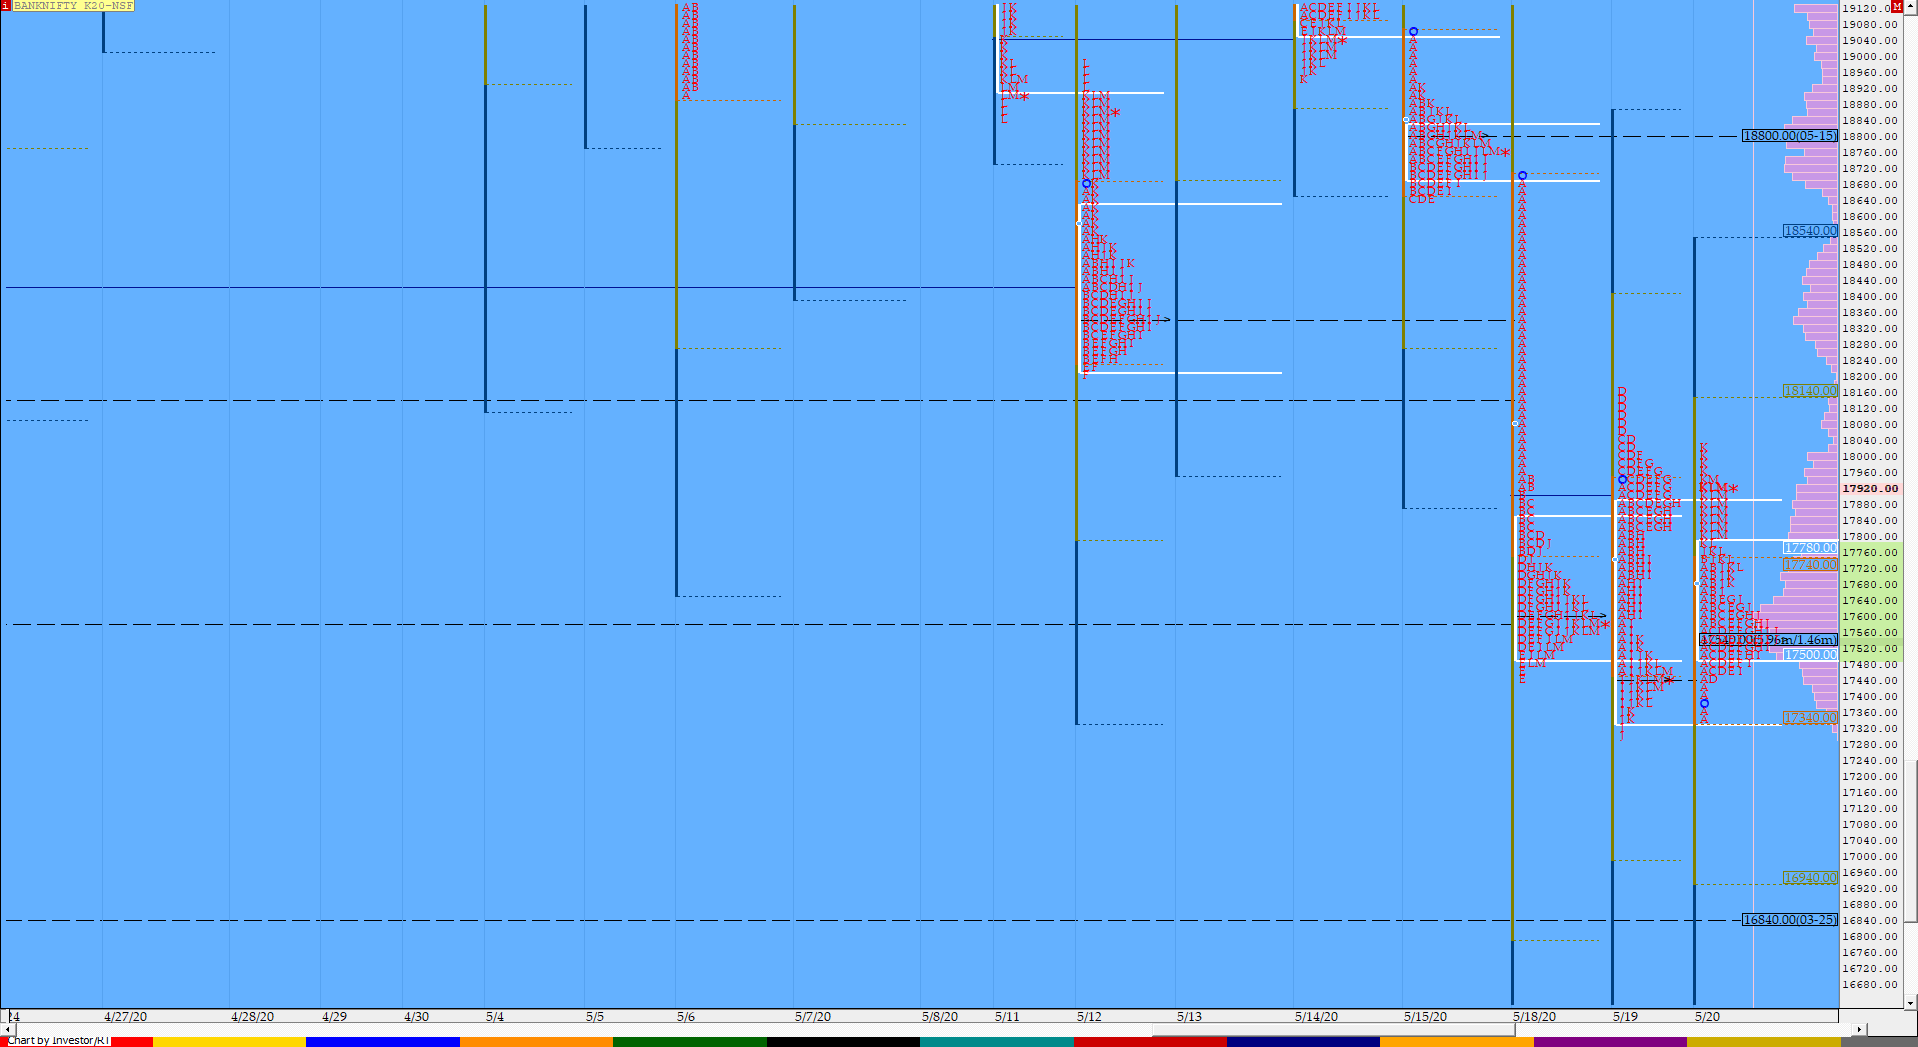 Bnf Compo1 13 Market Profile Analysis Dated 20Th May 2020 Banknifty Futures, Charts, Day Trading, Intraday Trading, Intraday Trading Strategies, Market Profile, Market Profile Trading Strategies, Nifty Futures, Order Flow Analysis, Support And Resistance, Technical Analysis, Trading Strategies, Volume Profile Trading